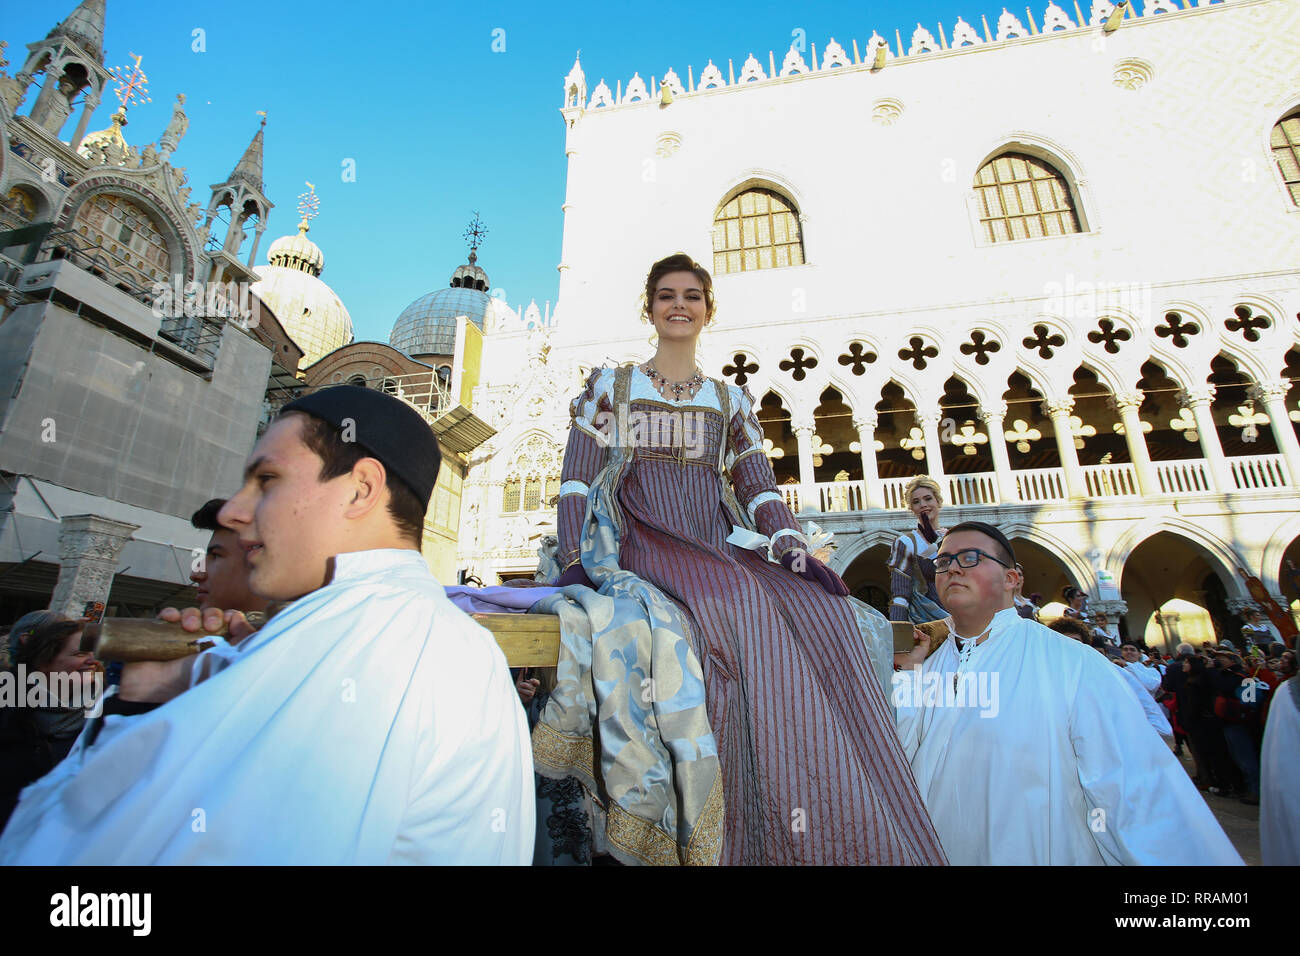 Venice, Italy. 23rd Feb, 2019. The homage that the Doge brought annually to twelve beautiful Venetian girls, giving them generously for the marriage with the dogali jewels has been renewed today with the 'Festa delle Marie', an appointment of the Venetian tradition. The event started in the early afternoon with the girls' parade, accompanied by historical costumed groups, from San Piero di Castello along Riva degli Schiavoni to the stage of Piazza San Marco where the official presentation of the Carnival from part of Prince Maurice Agosti. Credit: Independent Photo Agency/Alamy Live News Stock Photo